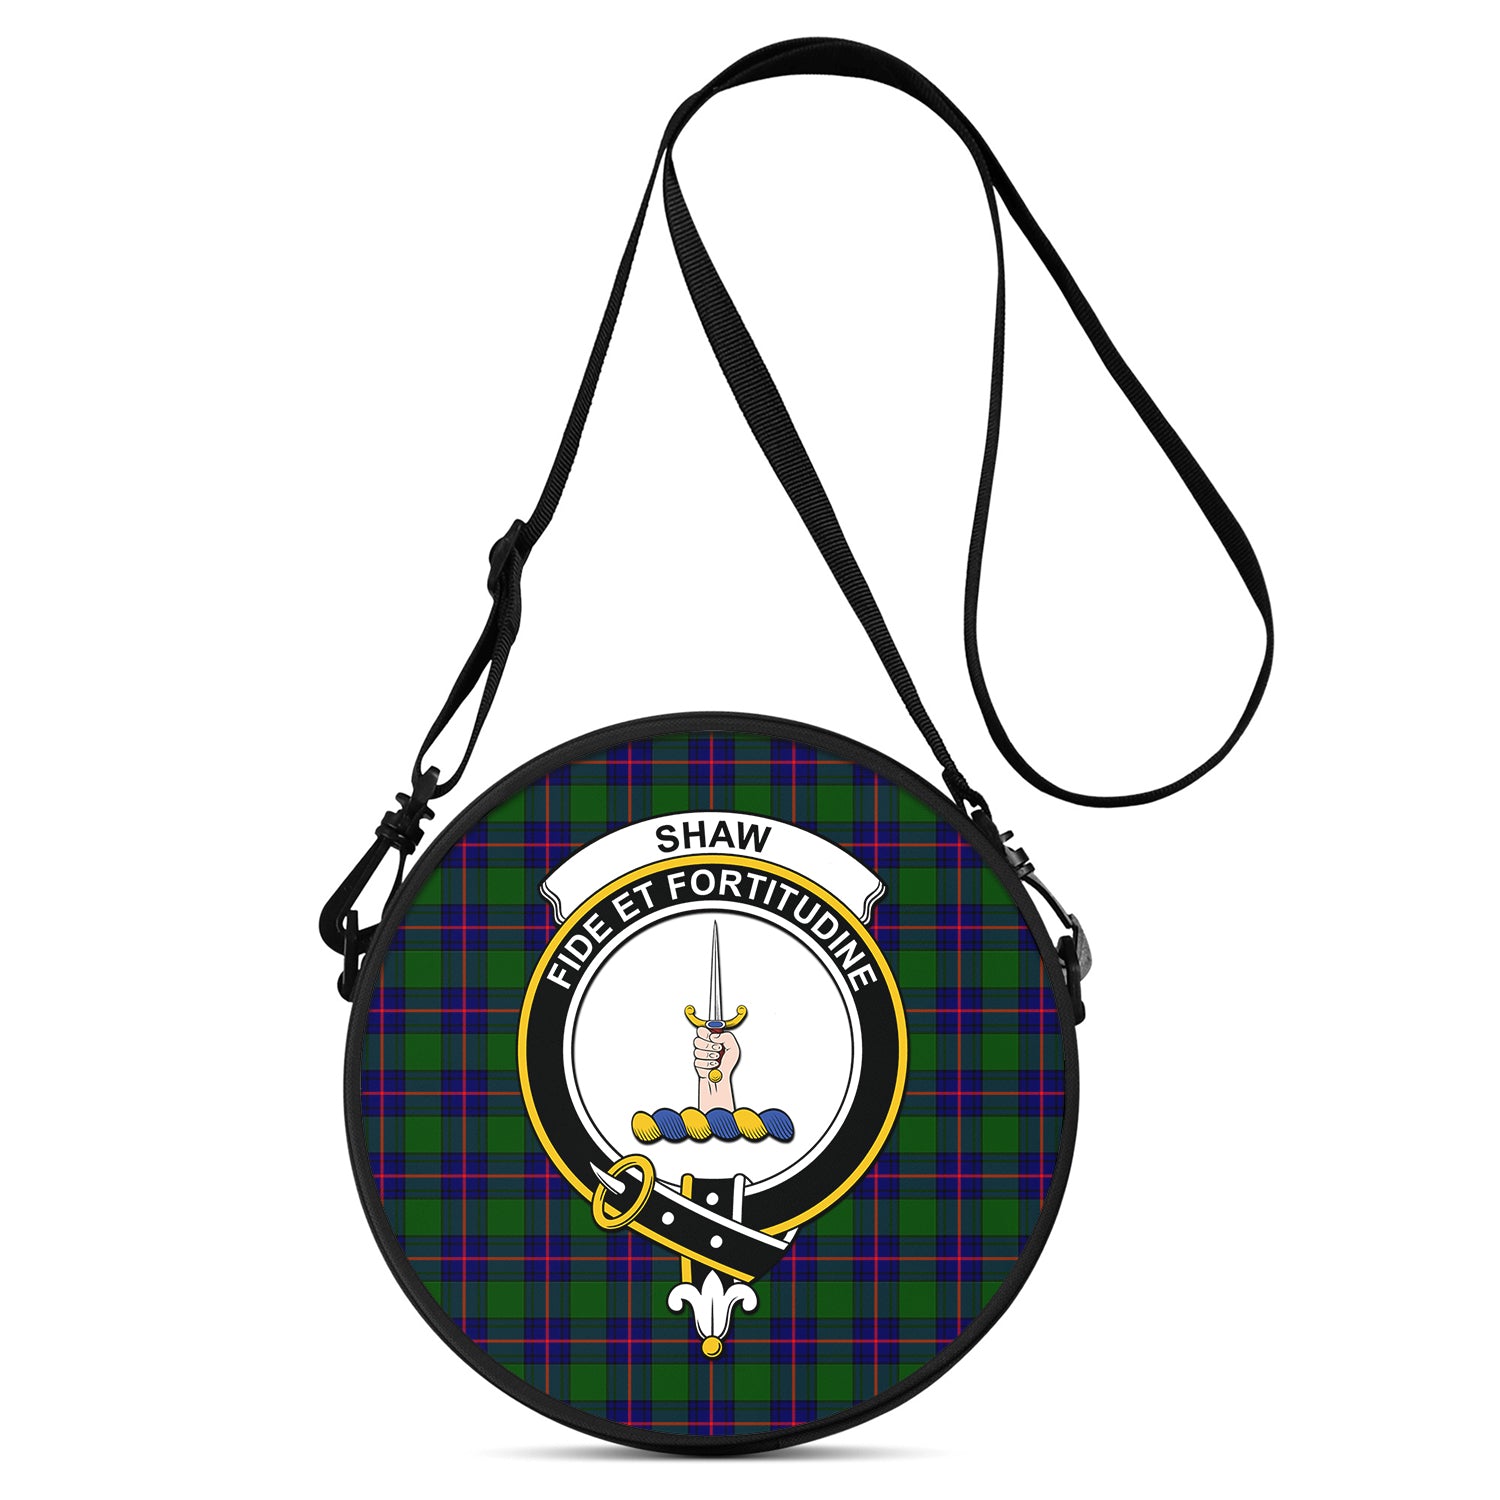 shaw-modern-tartan-round-satchel-bags-with-family-crest